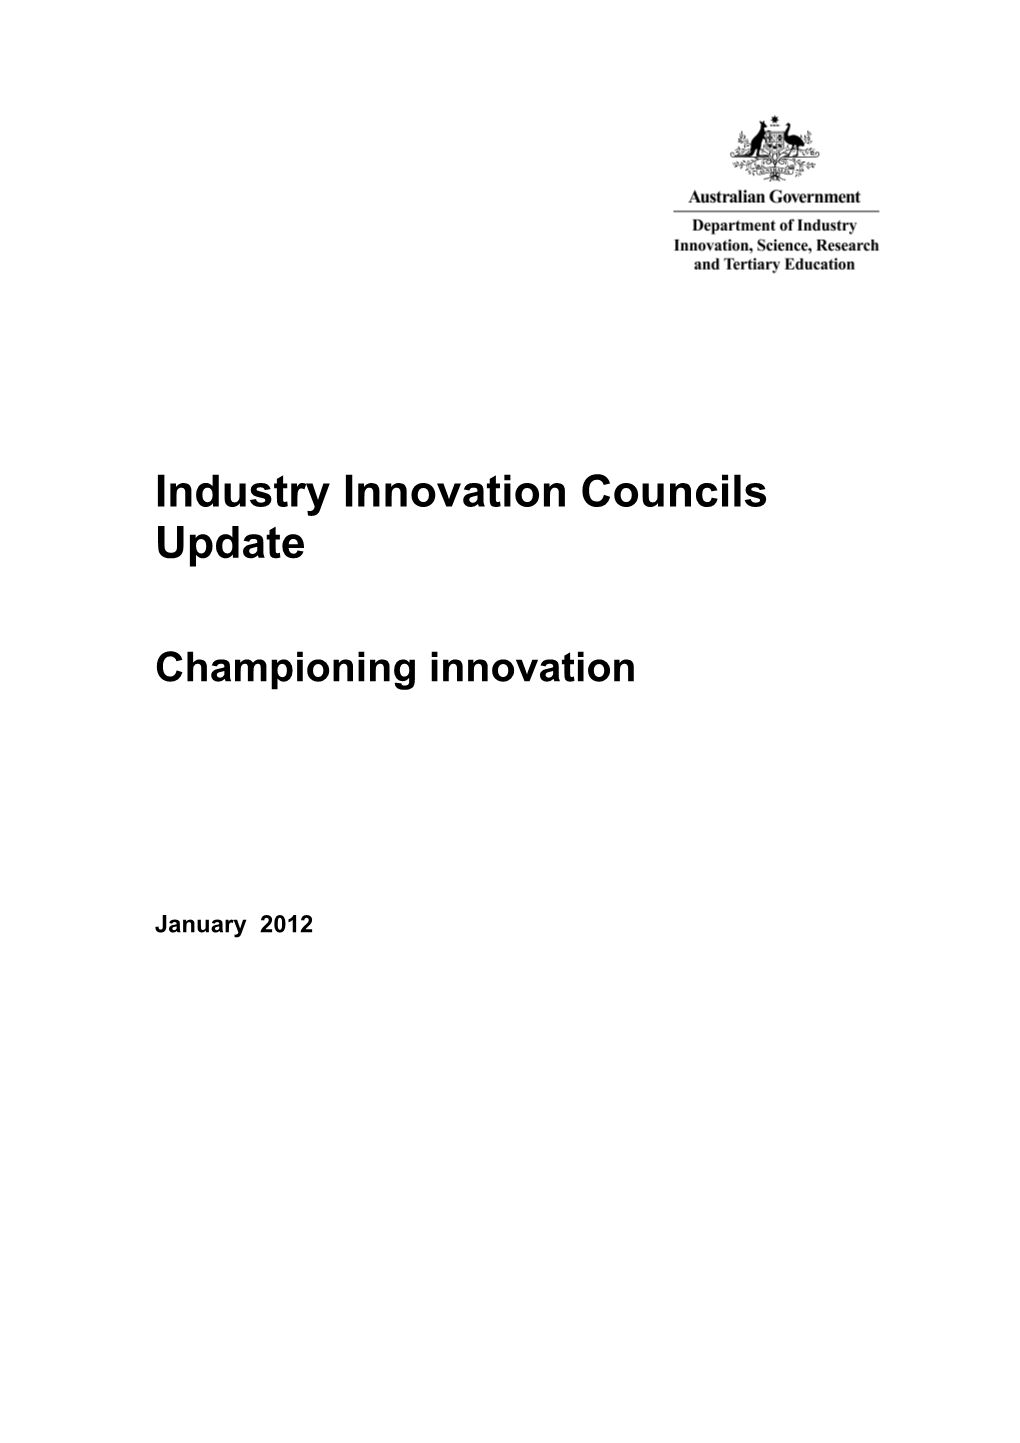 Industry Innovation Councils Update: Championing Innovation